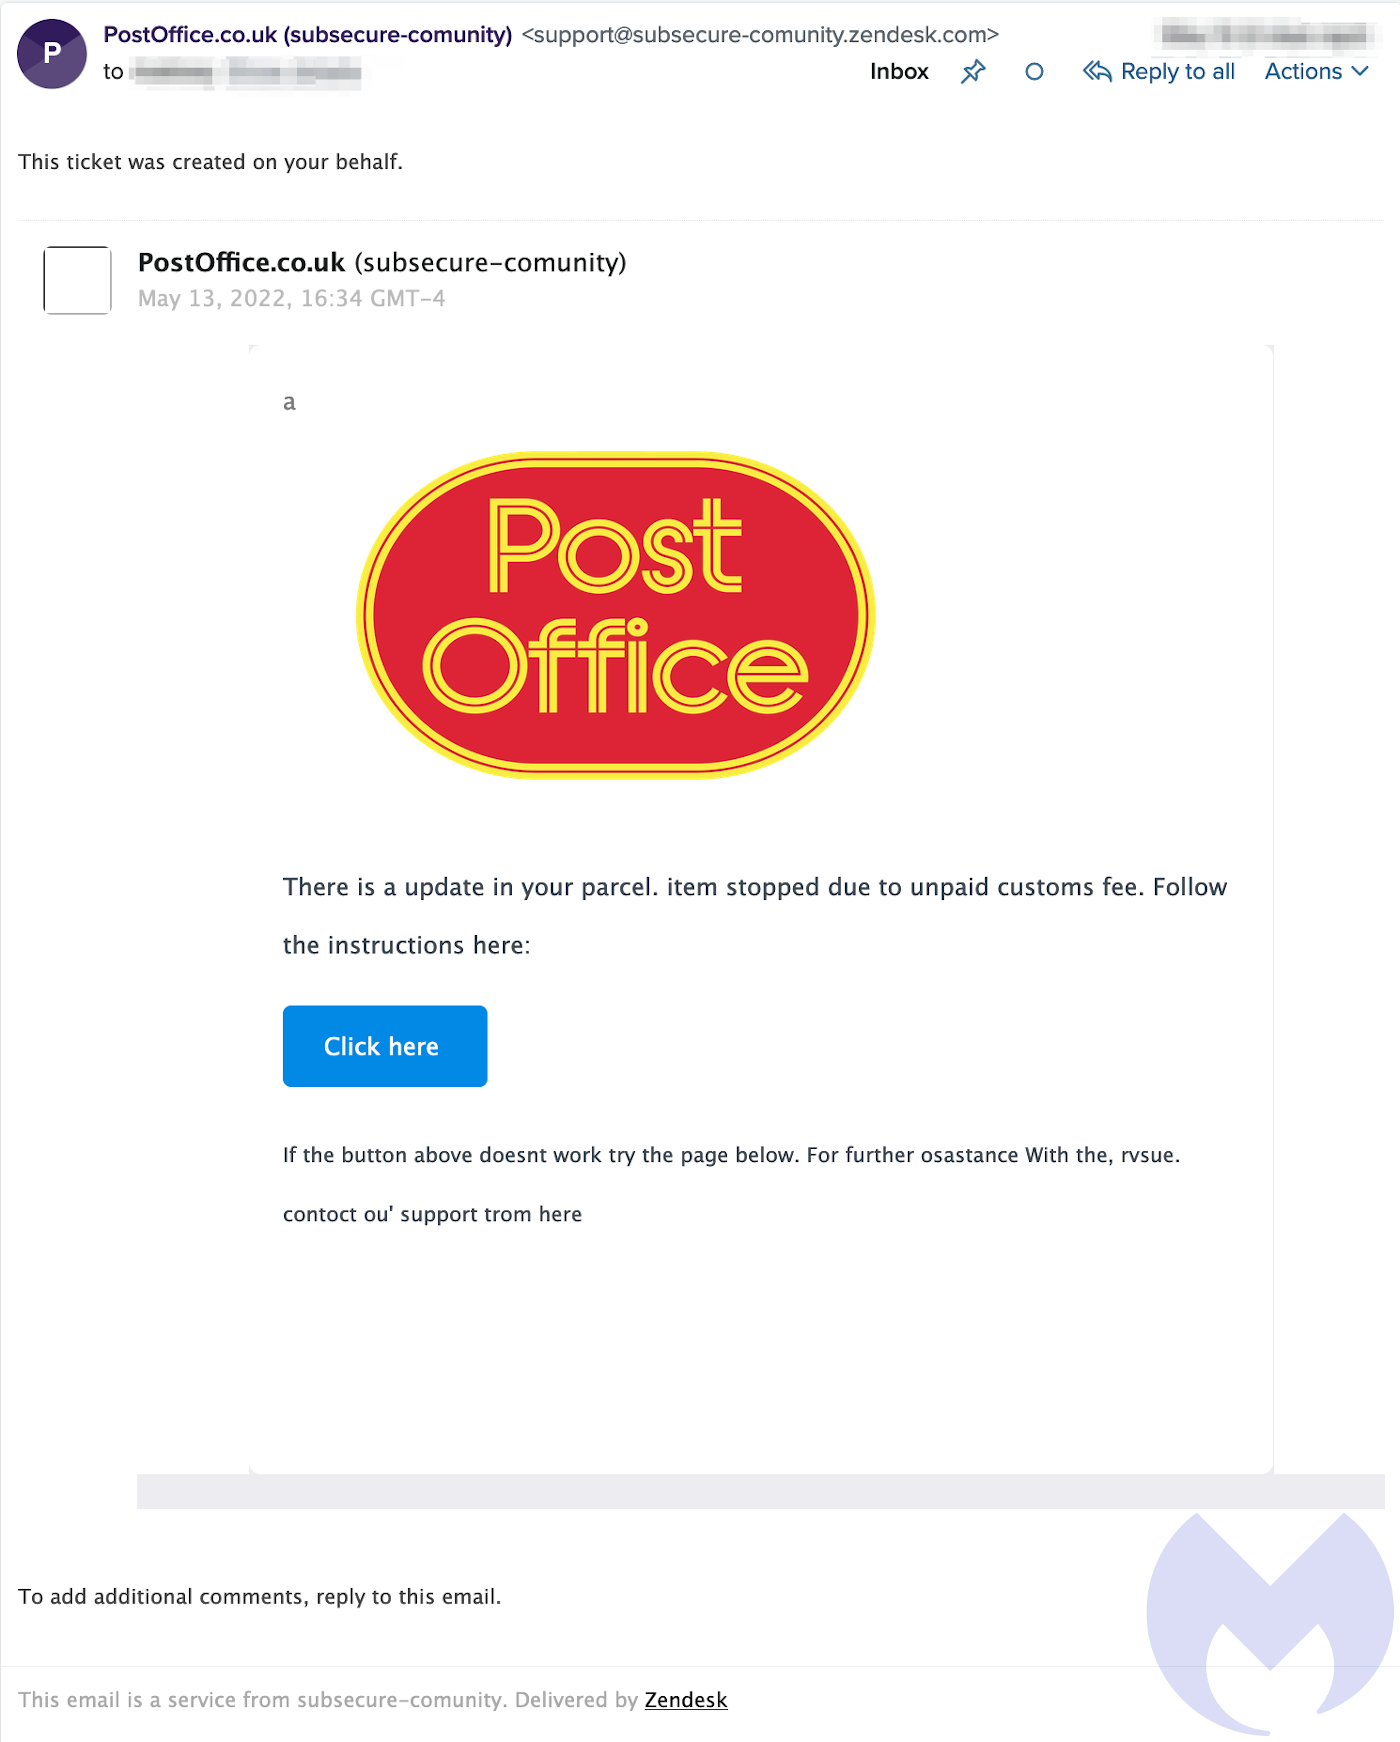 A scam email posing as a message from the Post Office